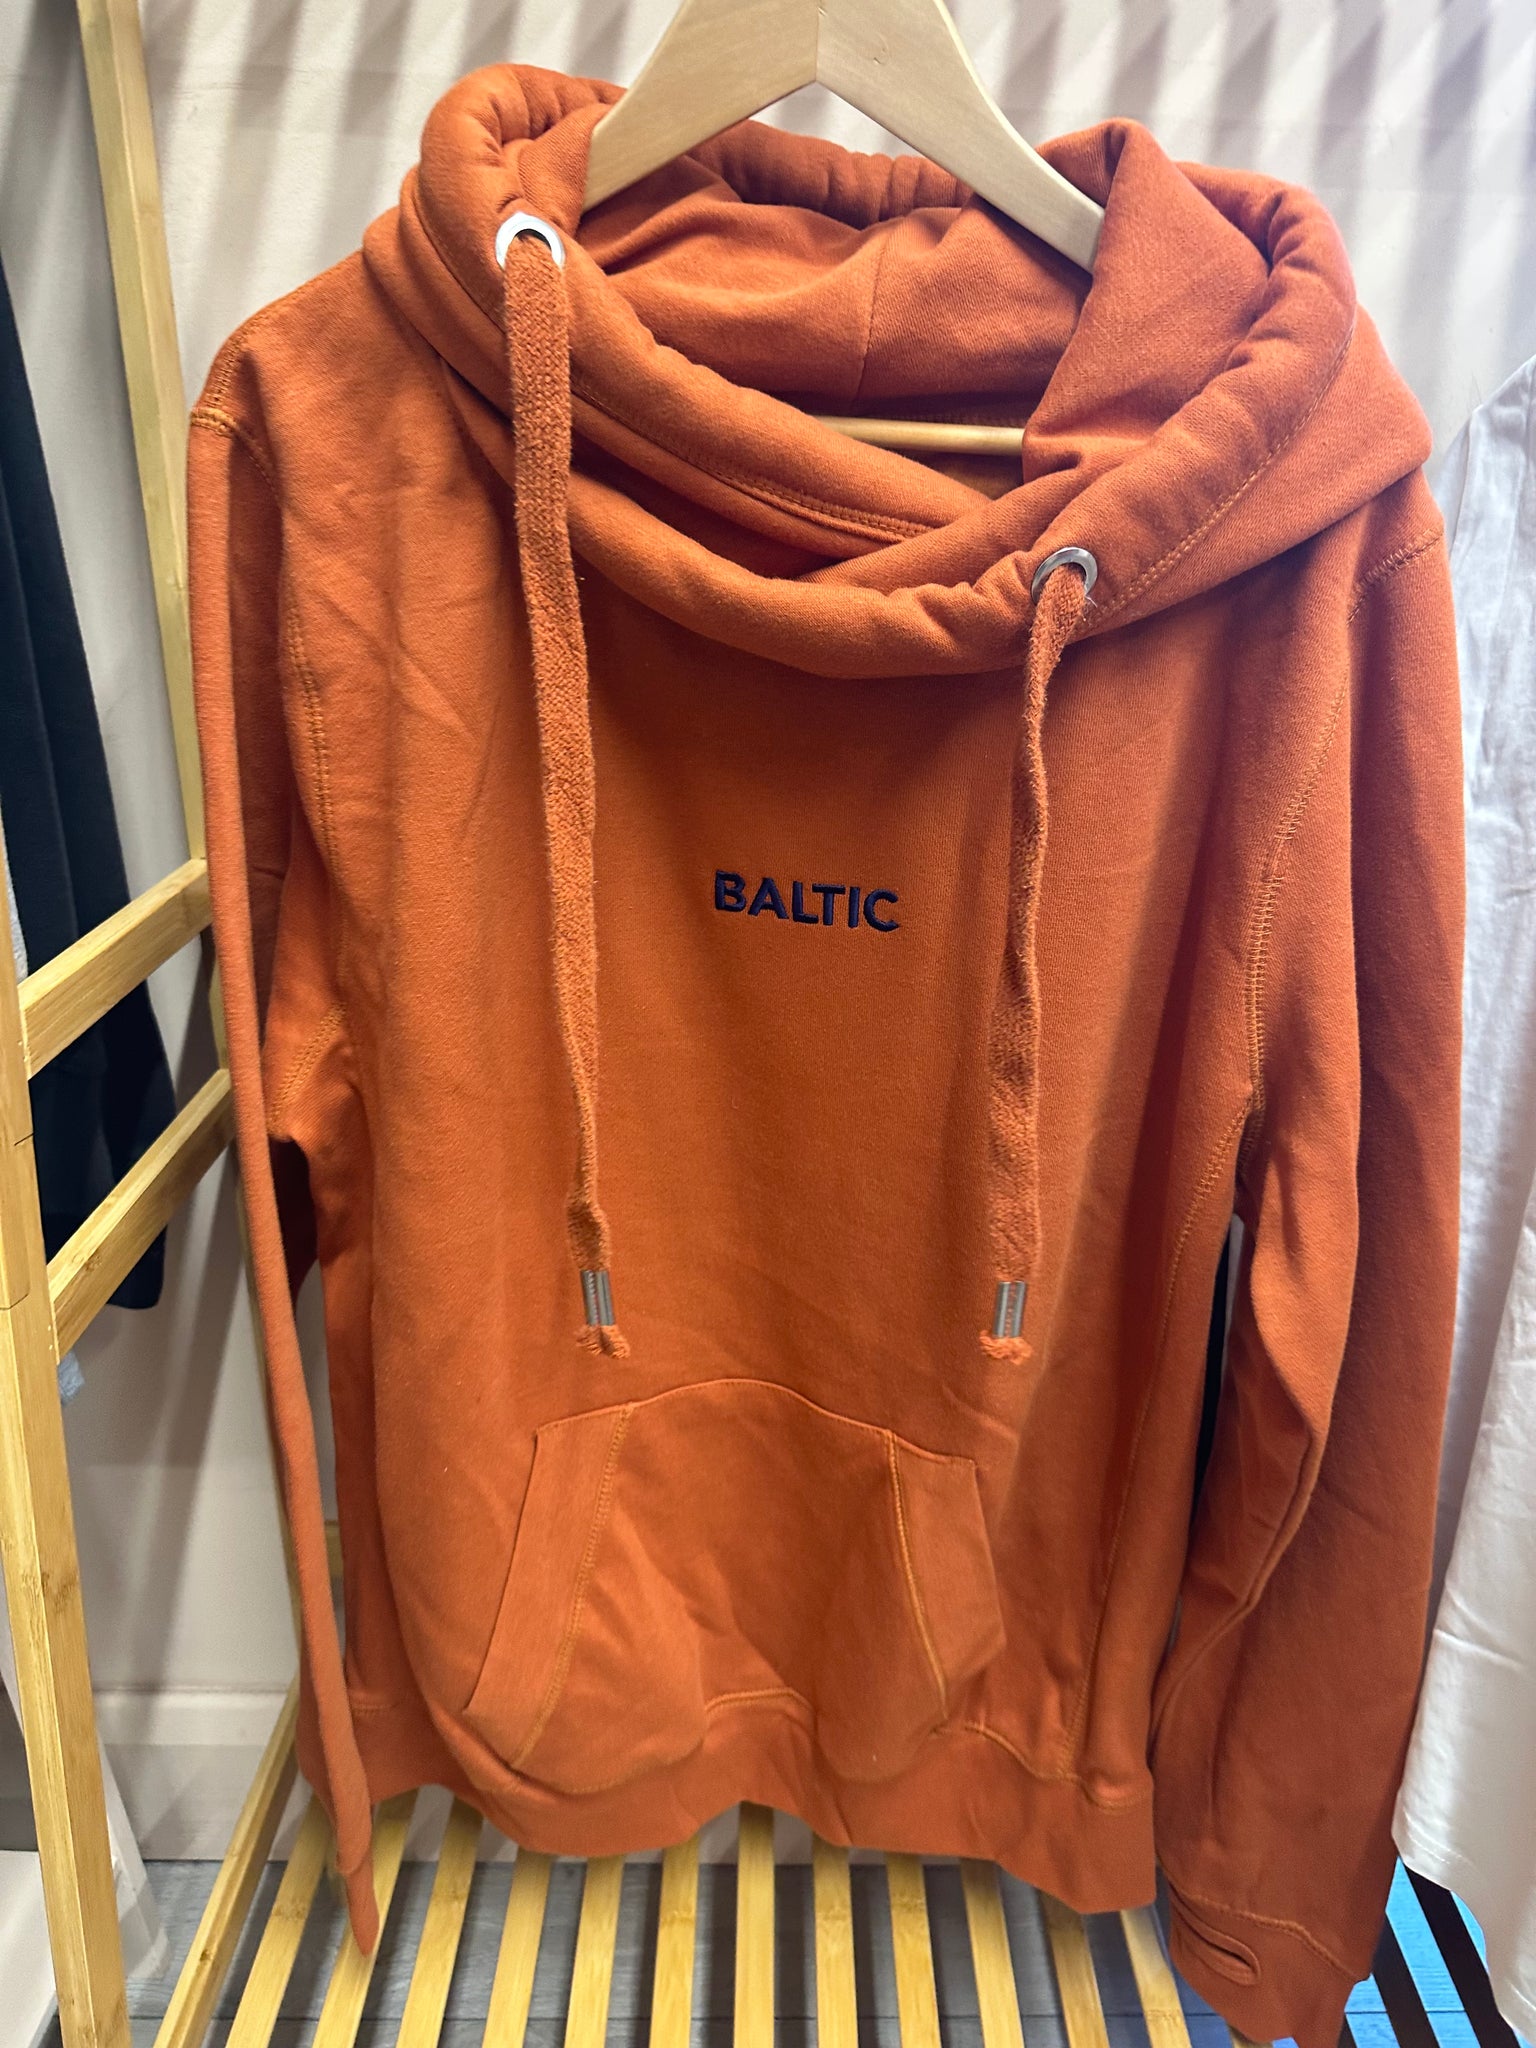 SAMPLE SALE Embroidered 'Baltic' Crossneck Hoodie, Ginger with Navy Stitching,  L